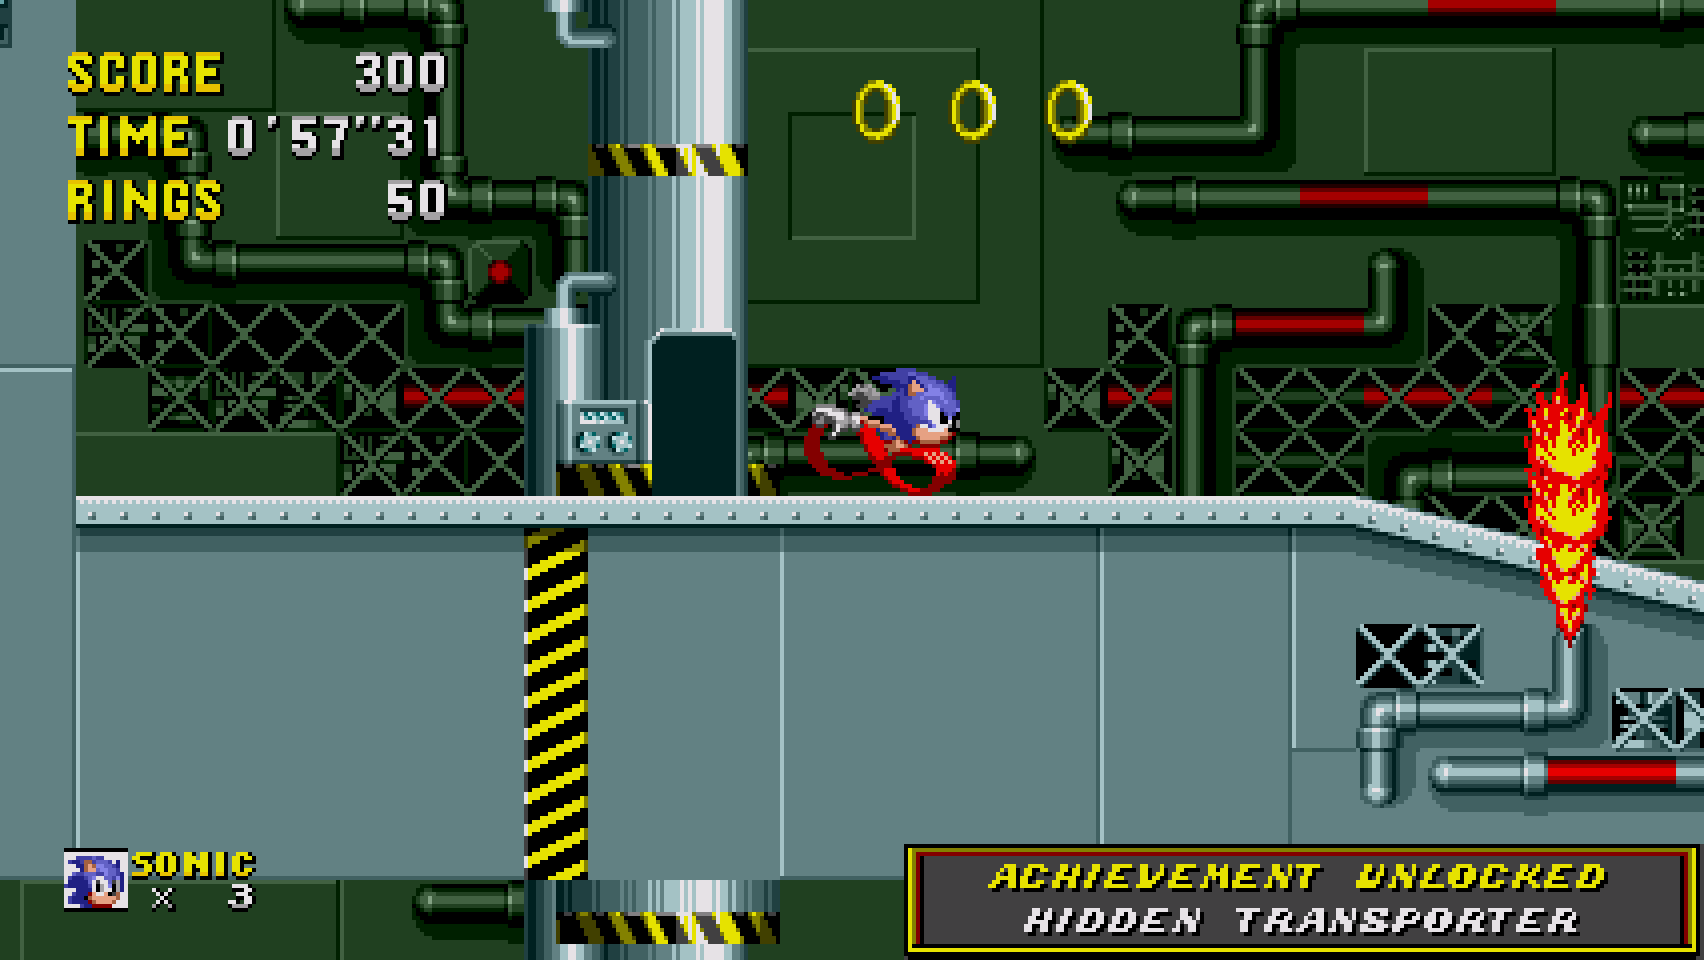 Sonic 1 Forever (Sonic) [Sonic 3 A.I.R.] [Mods]